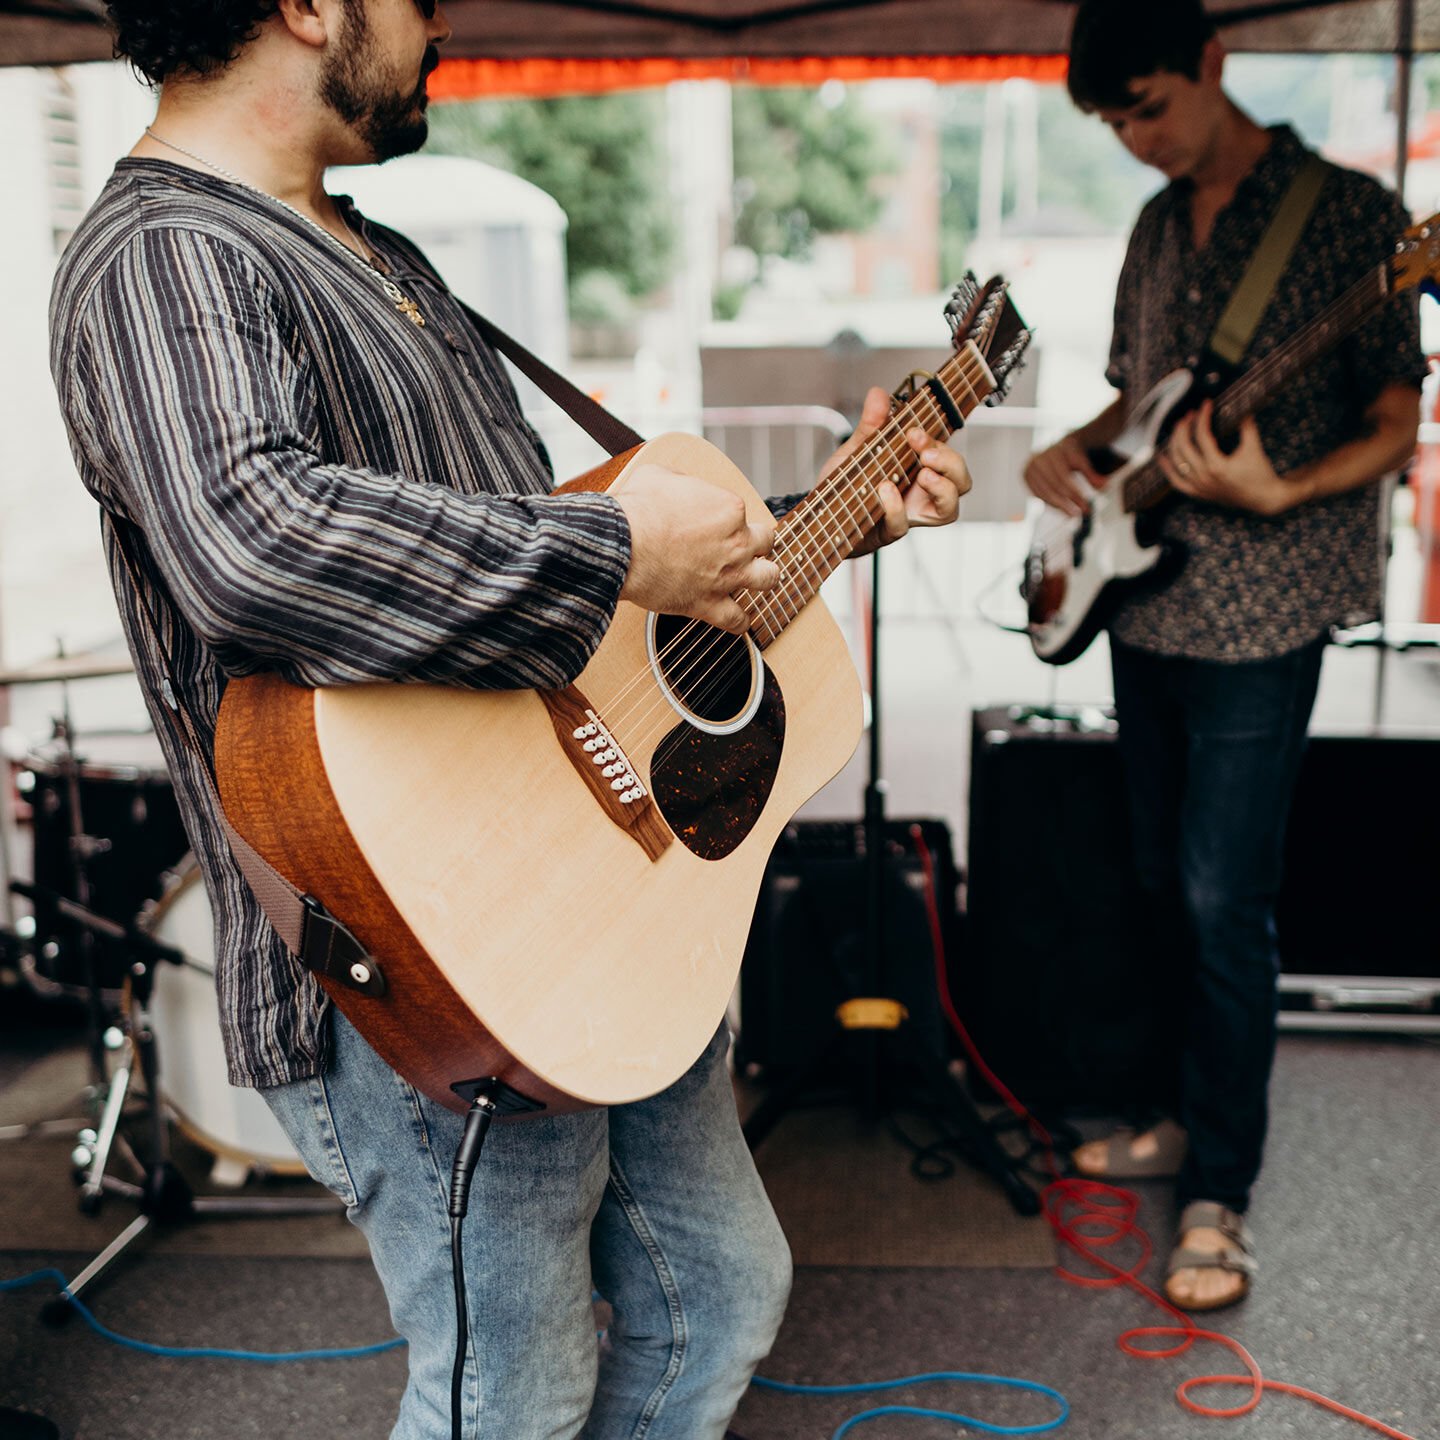 Two people playing guitar at a street fair